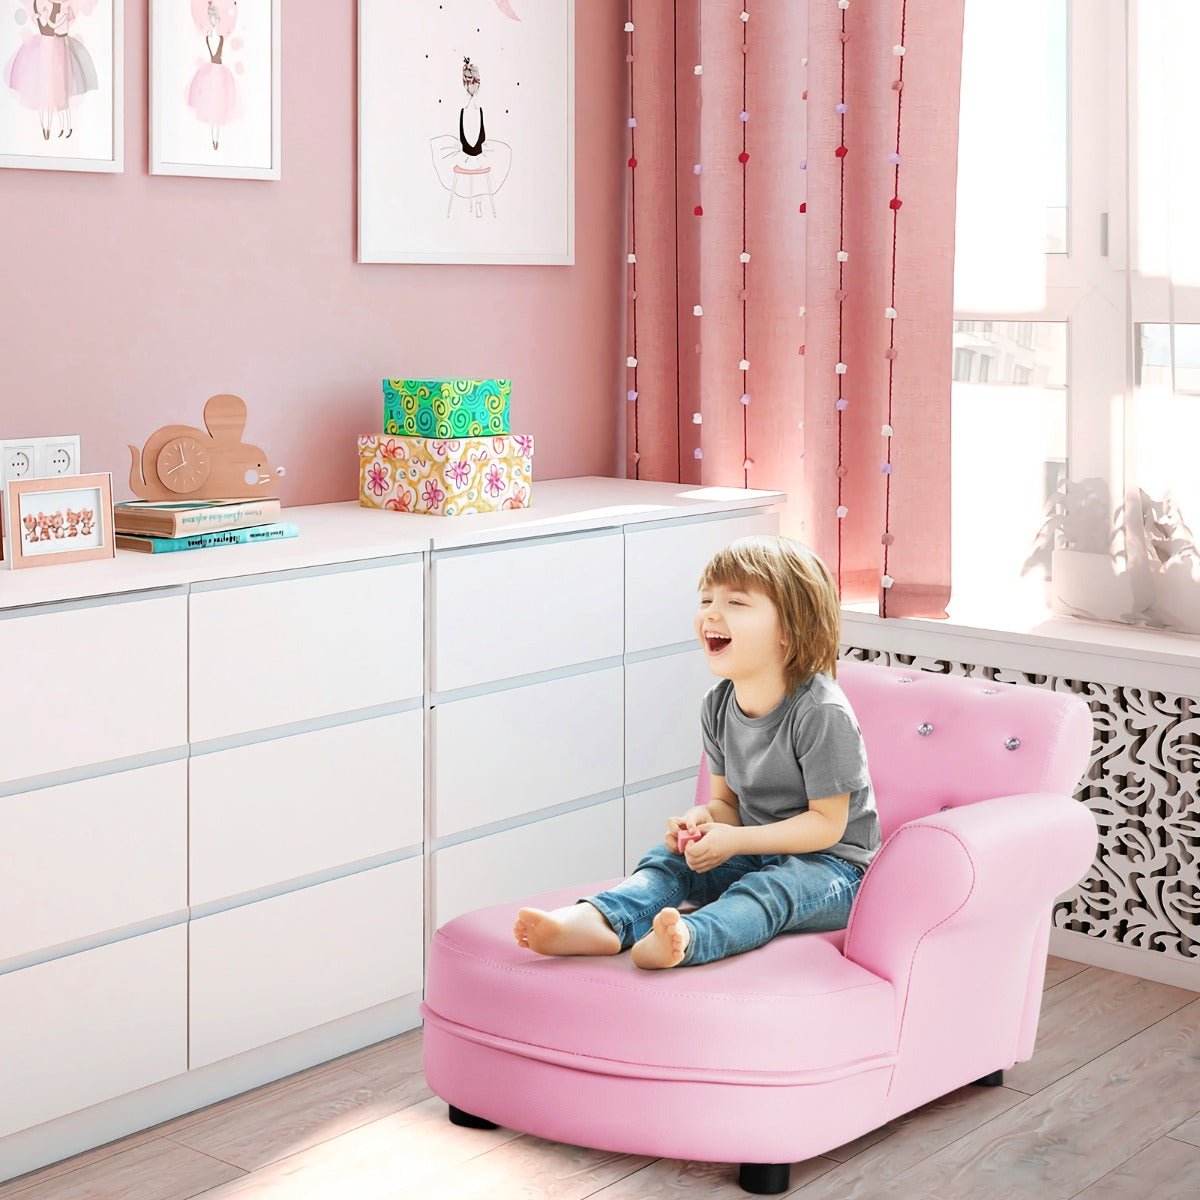 Pink Kids Sofa: PVC Leather and Crystal Accents - Plush Comfort Zone